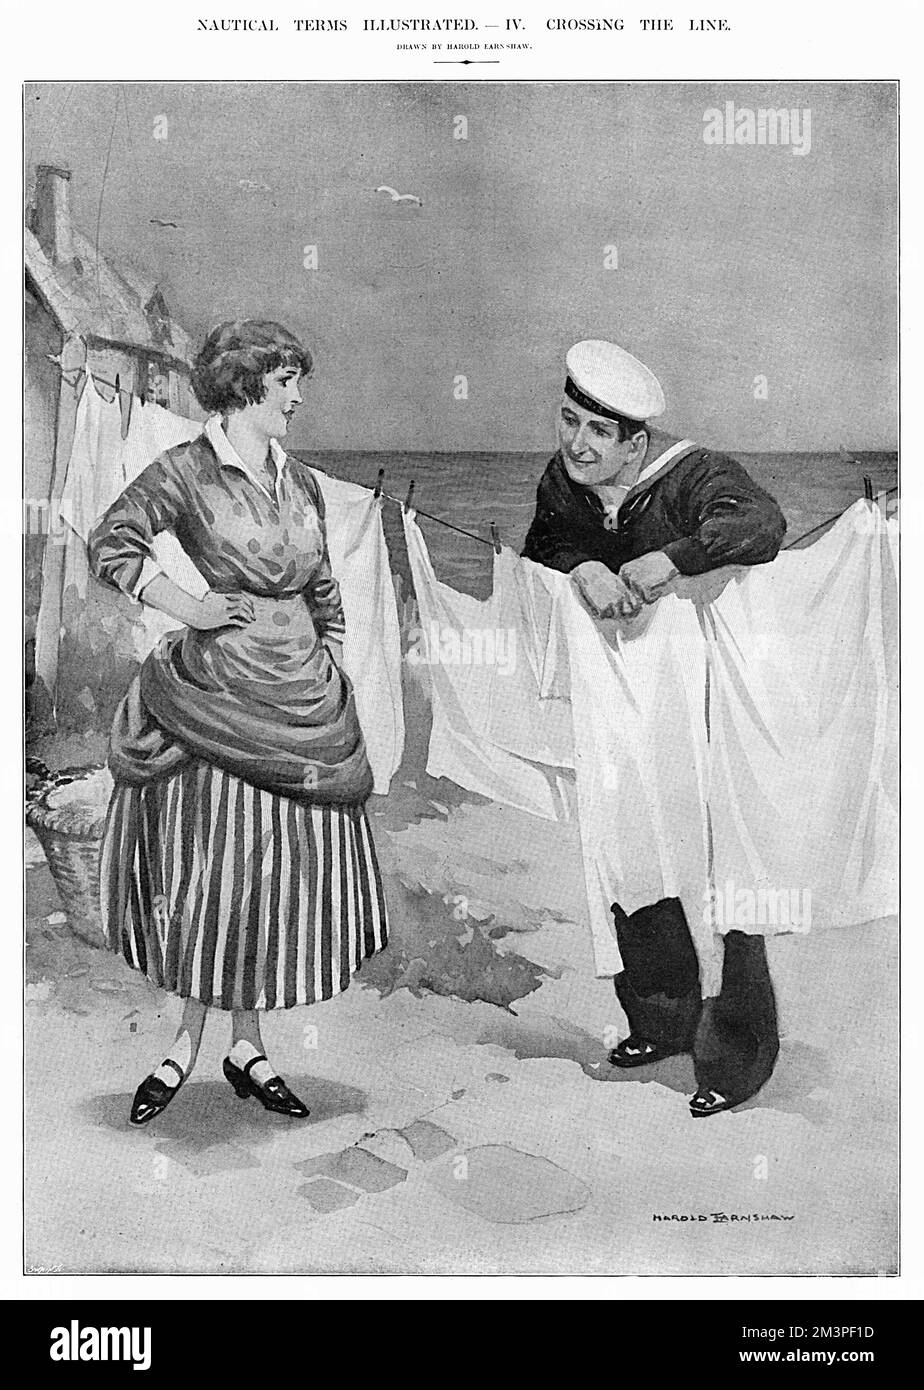 A sailor flirts with a woman over her washing line drawn by Harold Earnshaw, artist husband of Mabel Lucie Attwell.    Earnshaw was a successful artist who joined the Artists' Rifles at the outbreak of war. He was a Lance-Corporal with the Sussex Regiment when his right arm was blown off on the Somme in February 1916. He taught himself to draw with his left and continued to work for magazines such as The Bystander and the Illustrated Sporting and Dramatic News in which this picture was published. Despite making such a remarkable recovery he died prematurely in 1937 at the age of just 52.    S Stock Photo